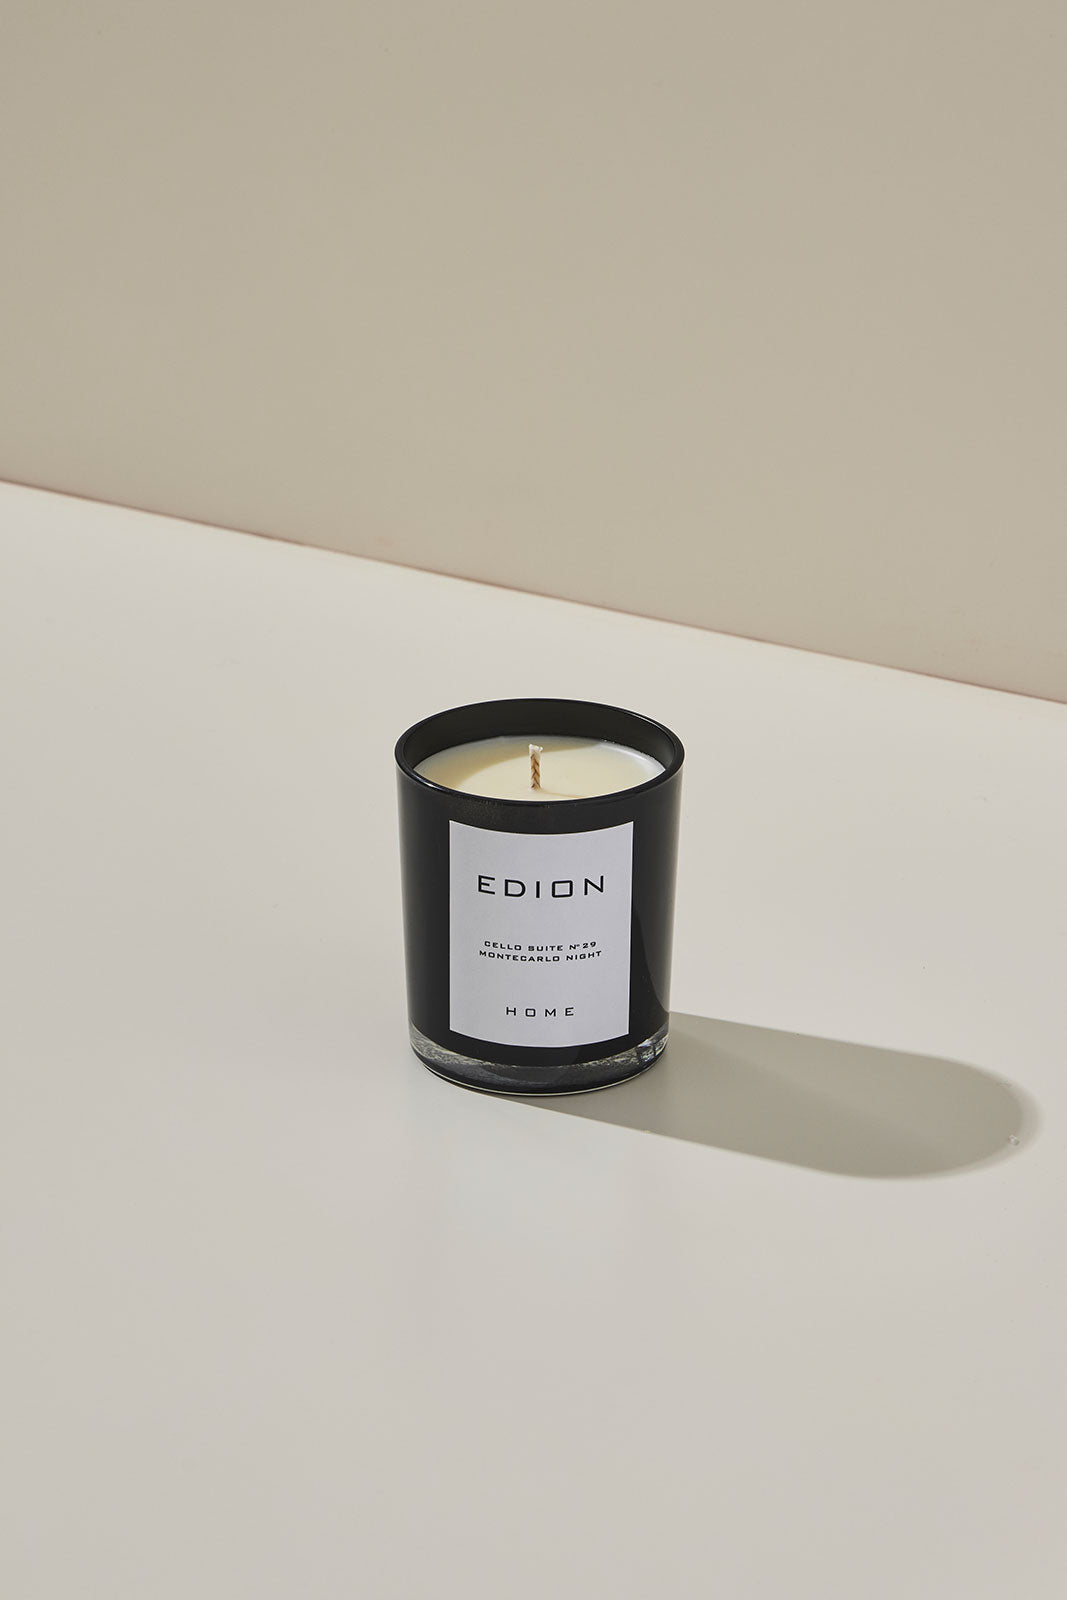 Scented candle Cello suite n.29 Montecarlo Night 